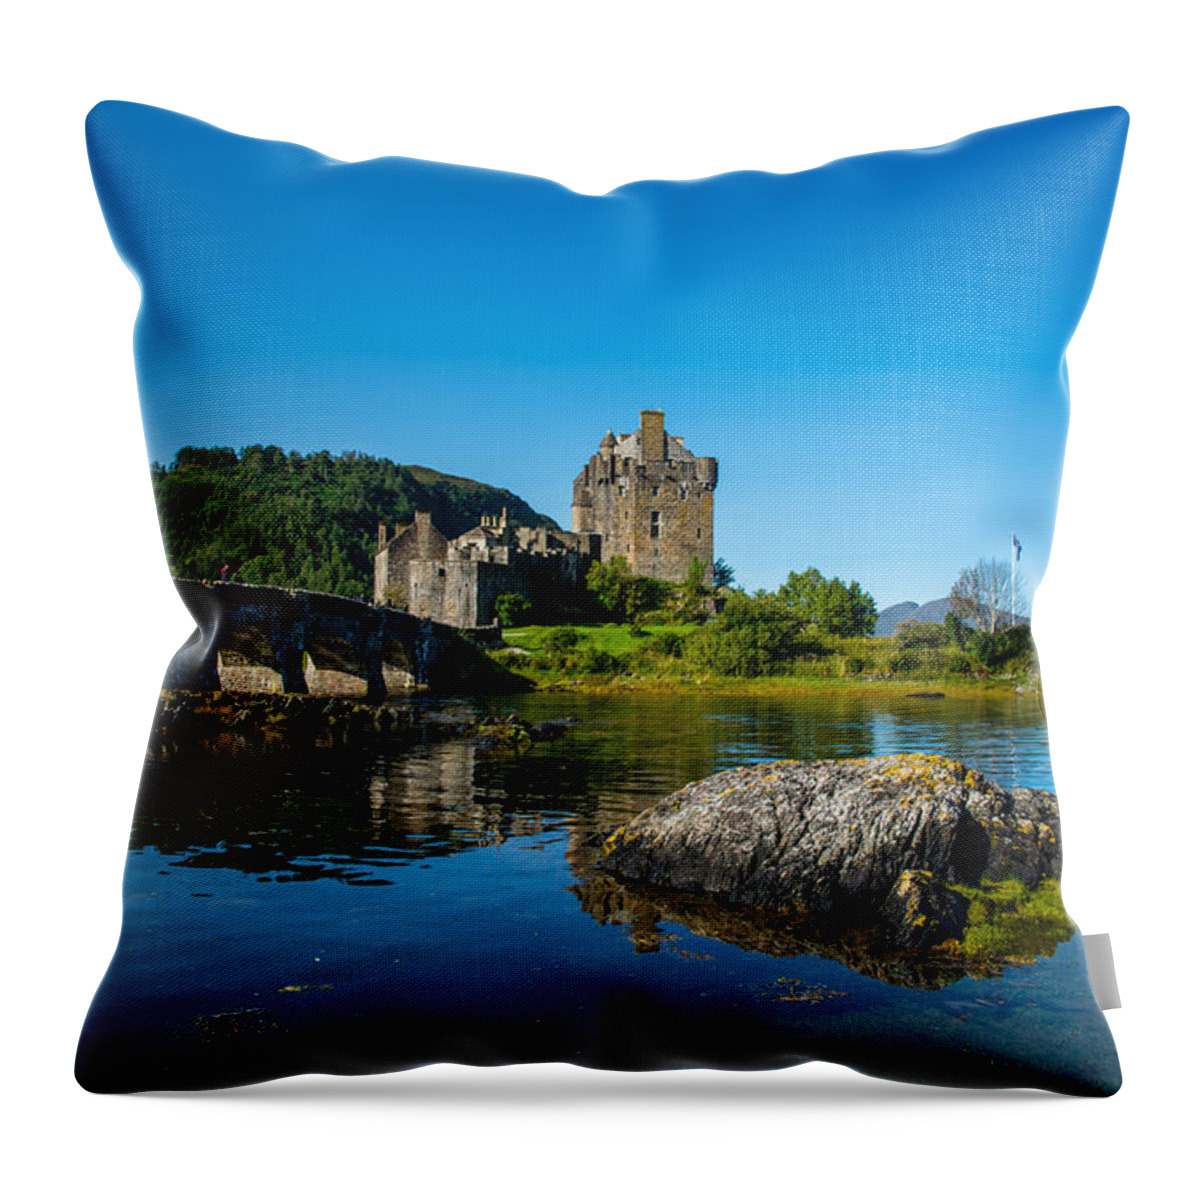 Scotland Throw Pillow featuring the photograph Eilean Donan Castle In Scotland by Andreas Berthold